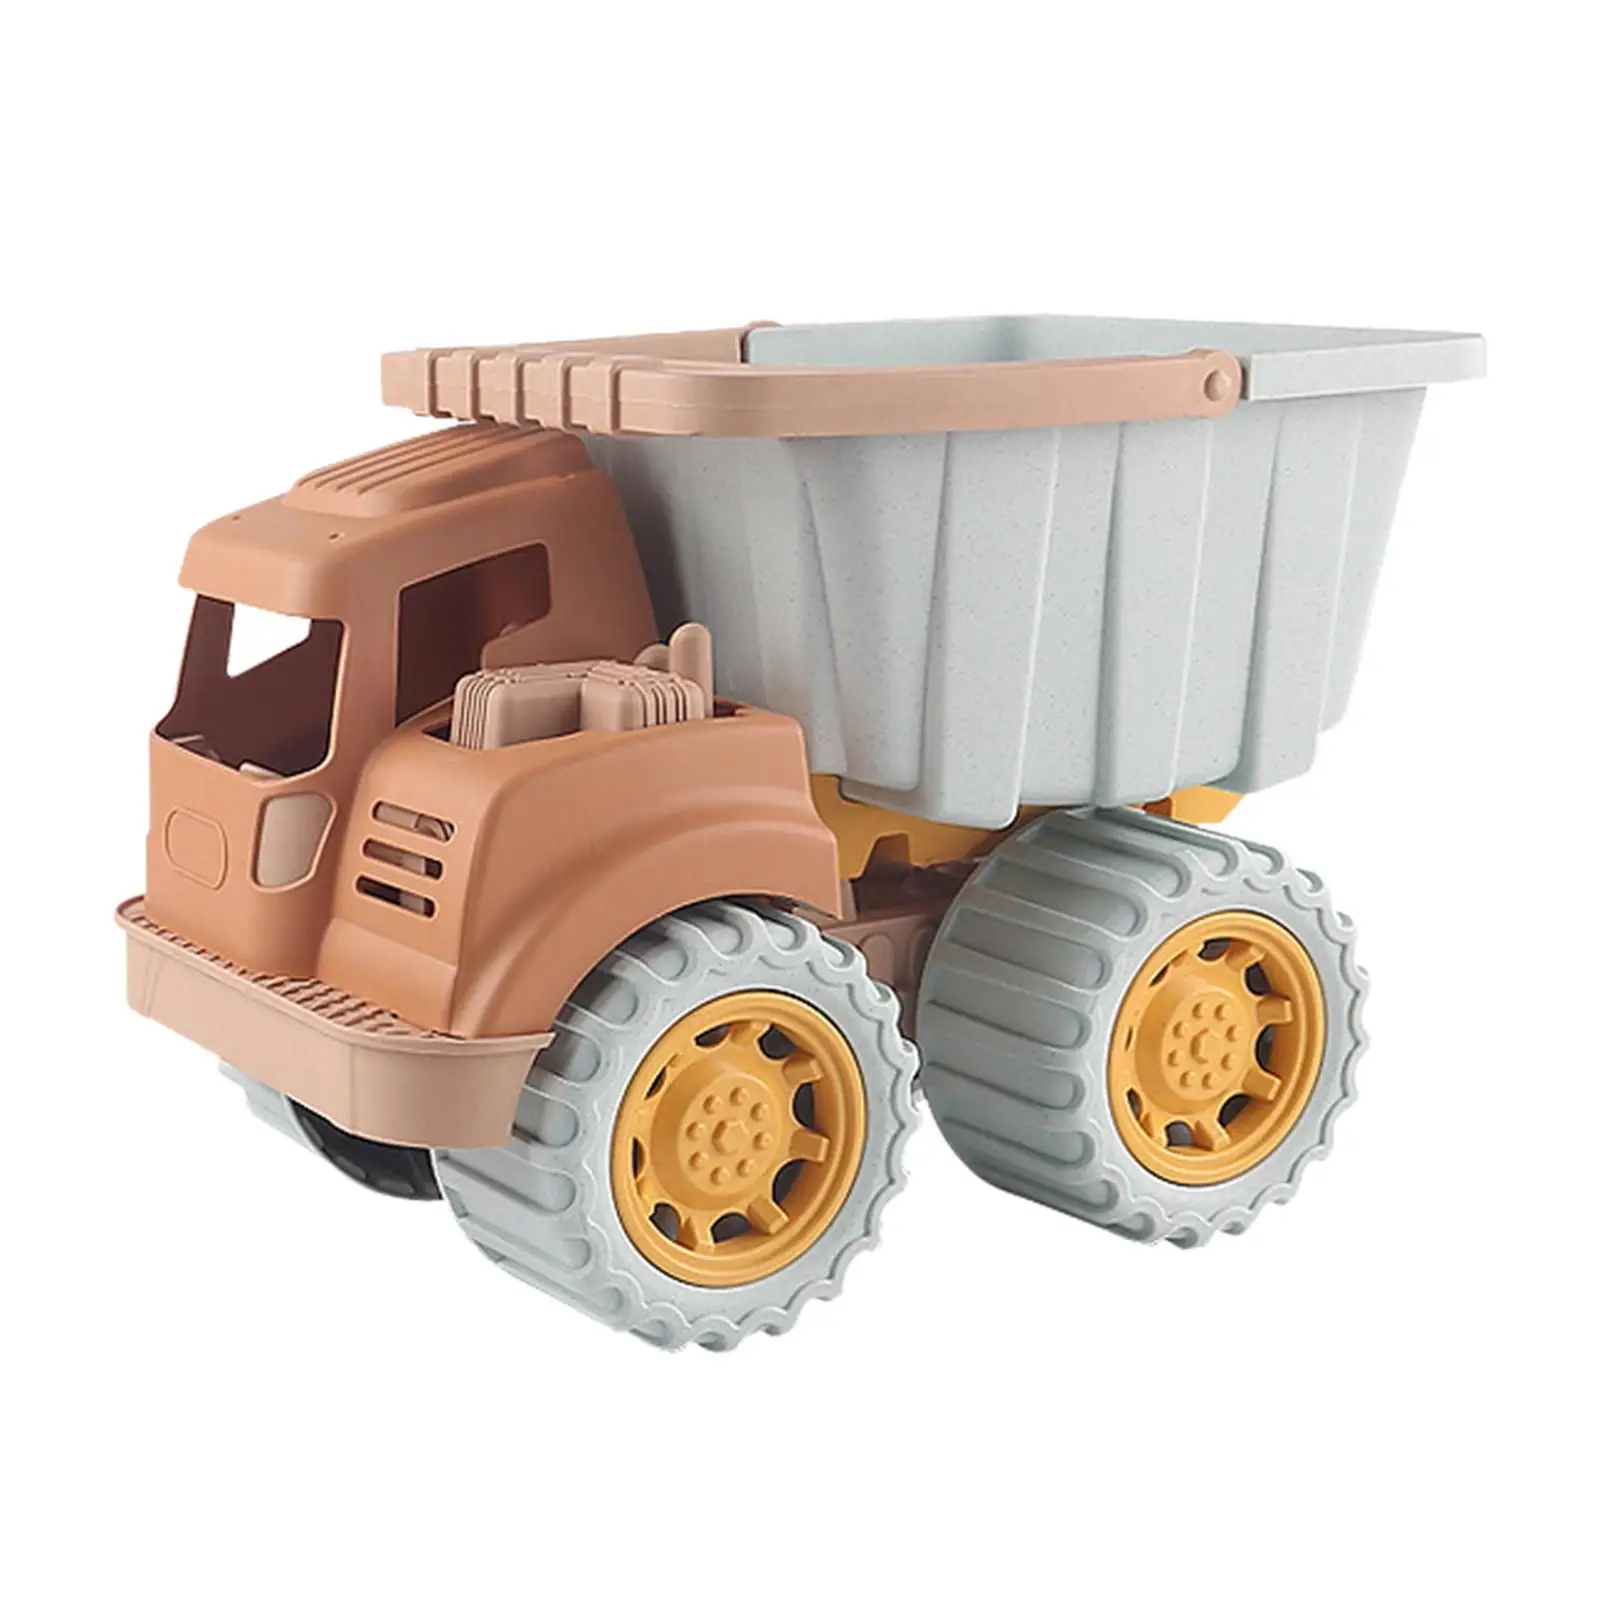 Beach Toy Dump Trucks Durable Push and go for Party Favors Indoors Outdoors Boys Girls Children Aged 3 4 5